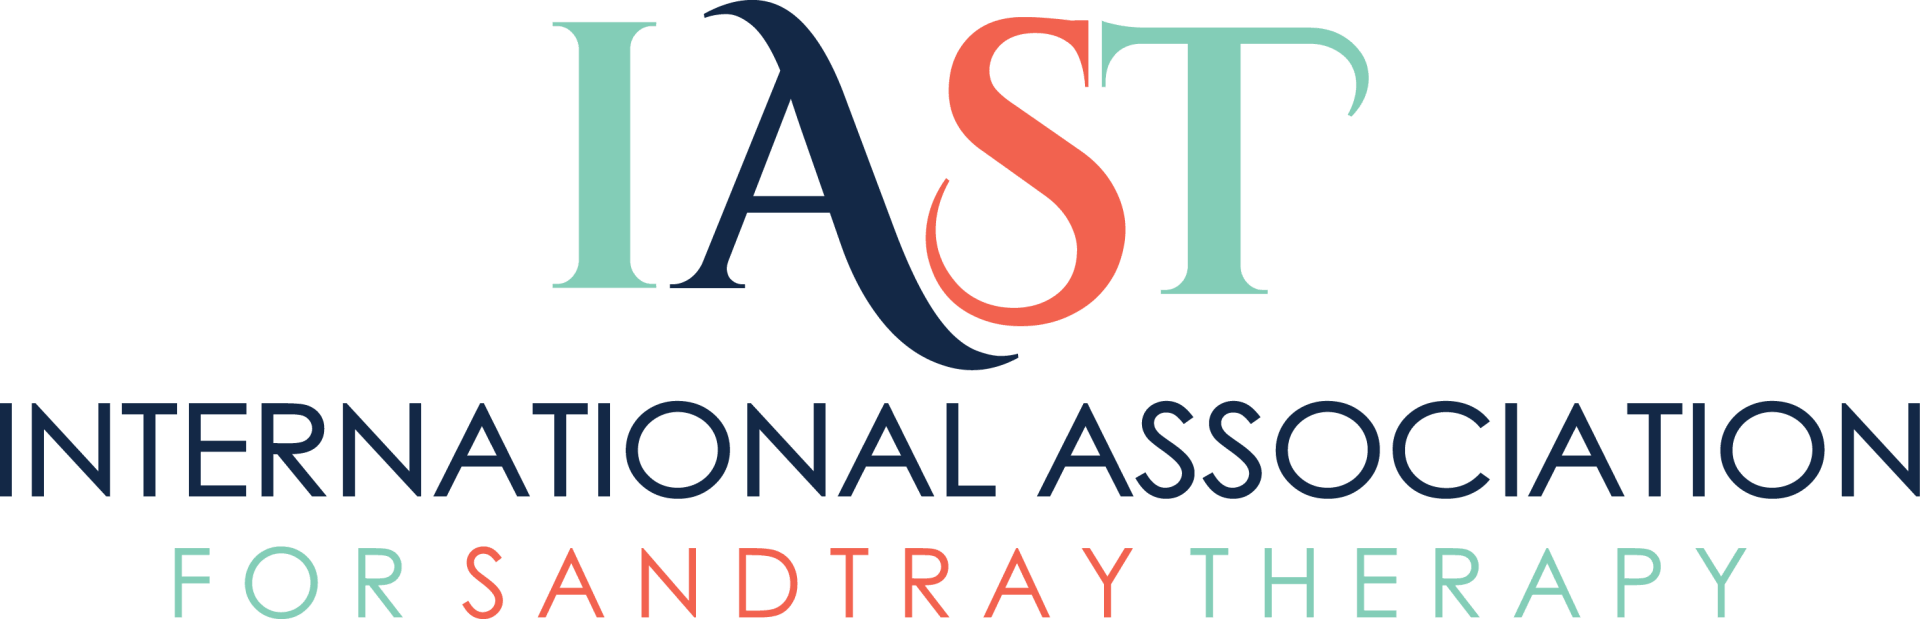 international association for sandtray therapy color logo